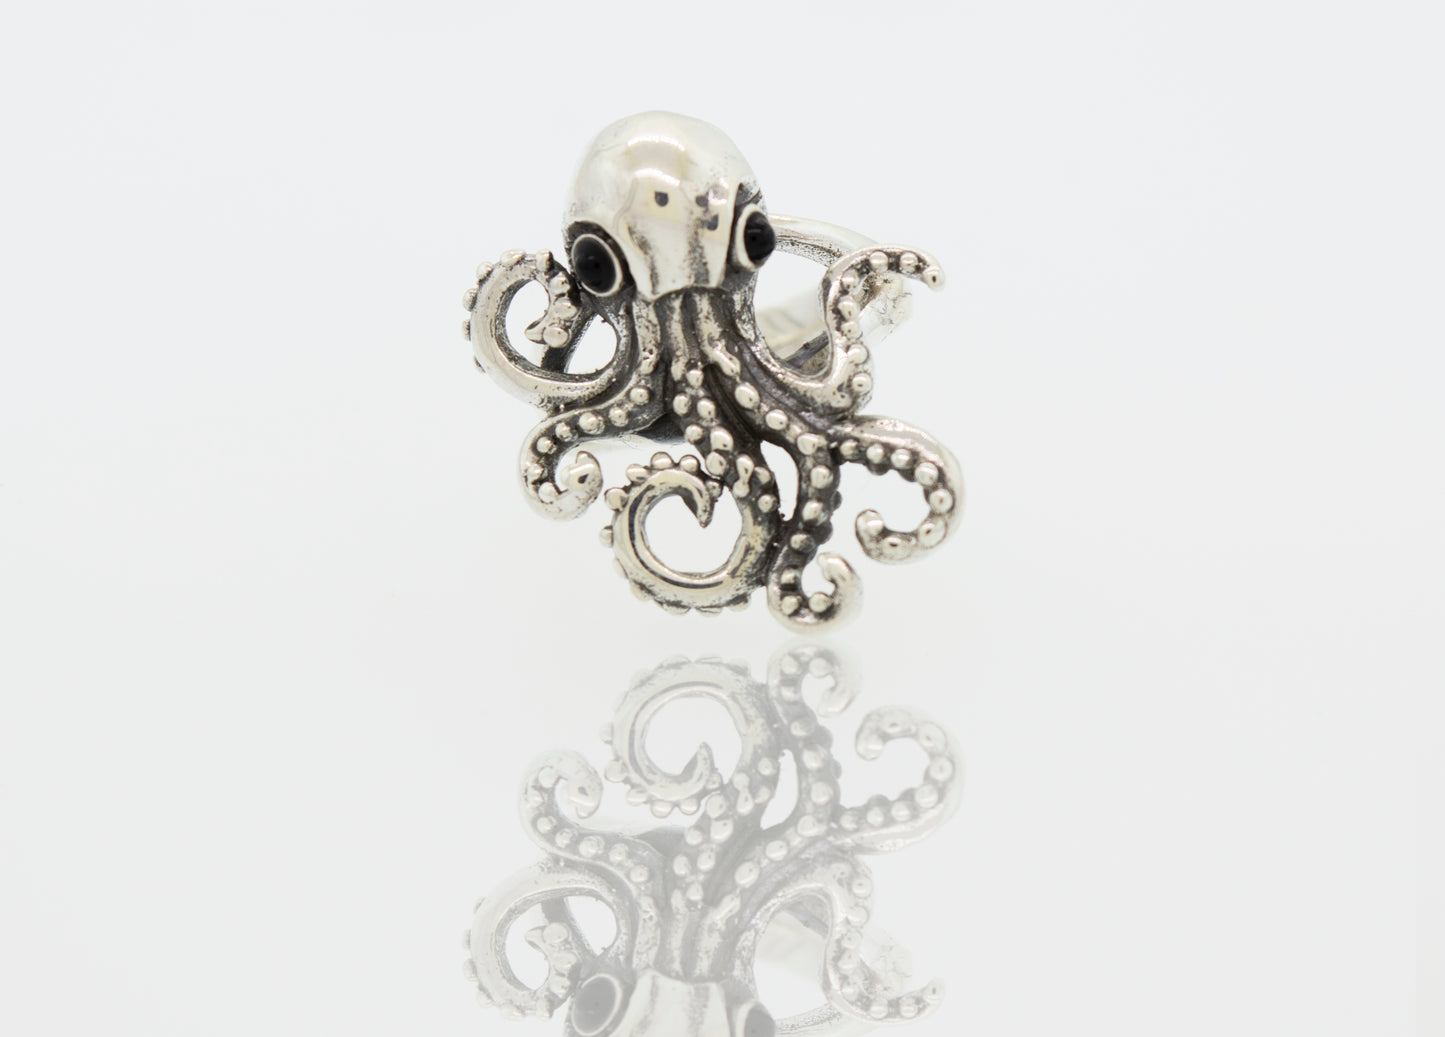 An Octopus Adjustable Ring with tentacle design on a white background.